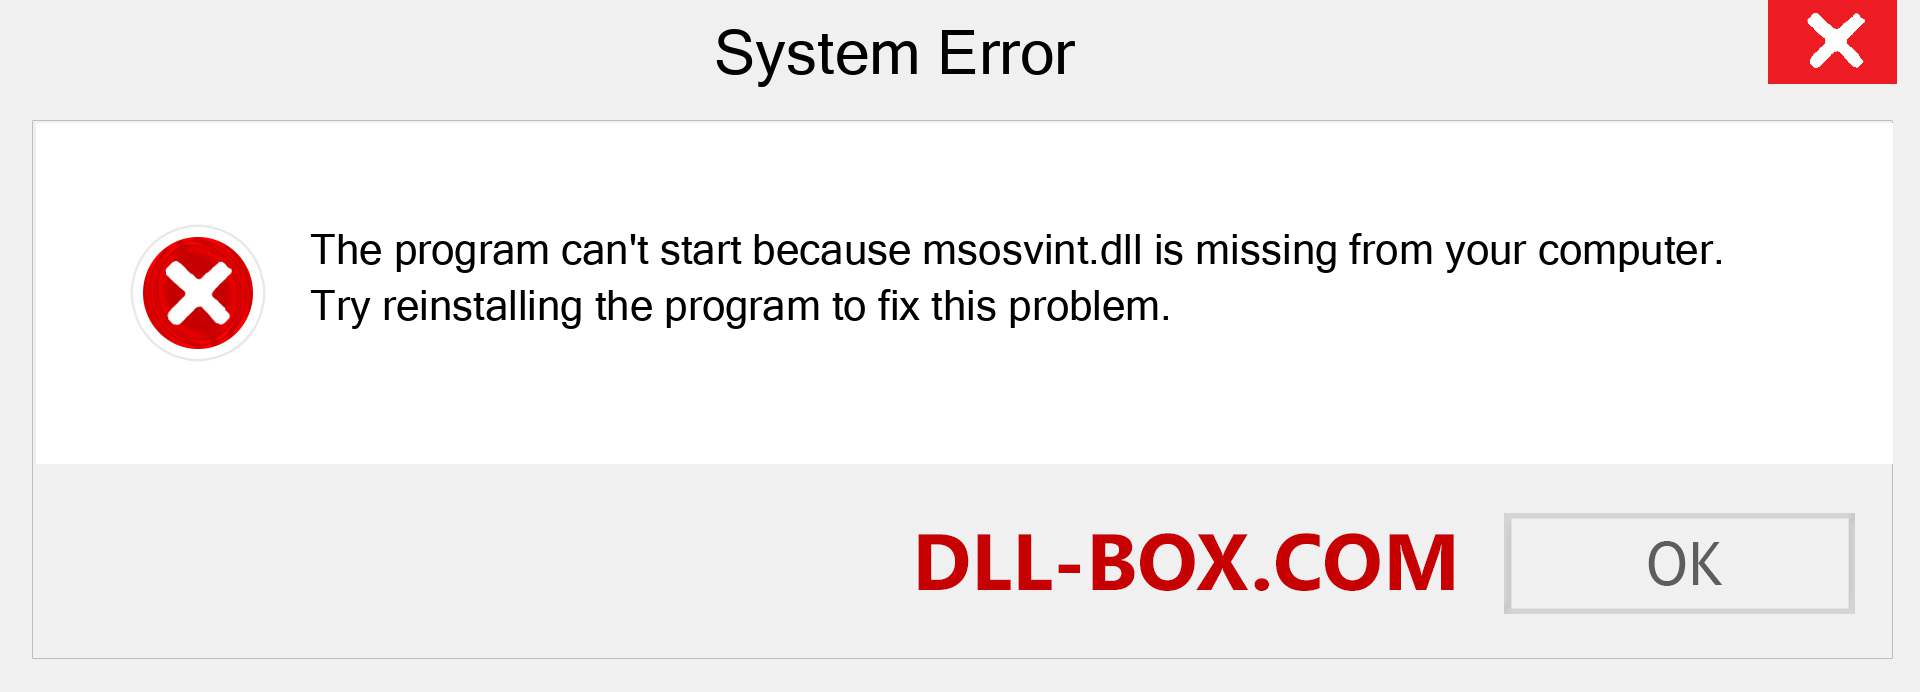  msosvint.dll file is missing?. Download for Windows 7, 8, 10 - Fix  msosvint dll Missing Error on Windows, photos, images